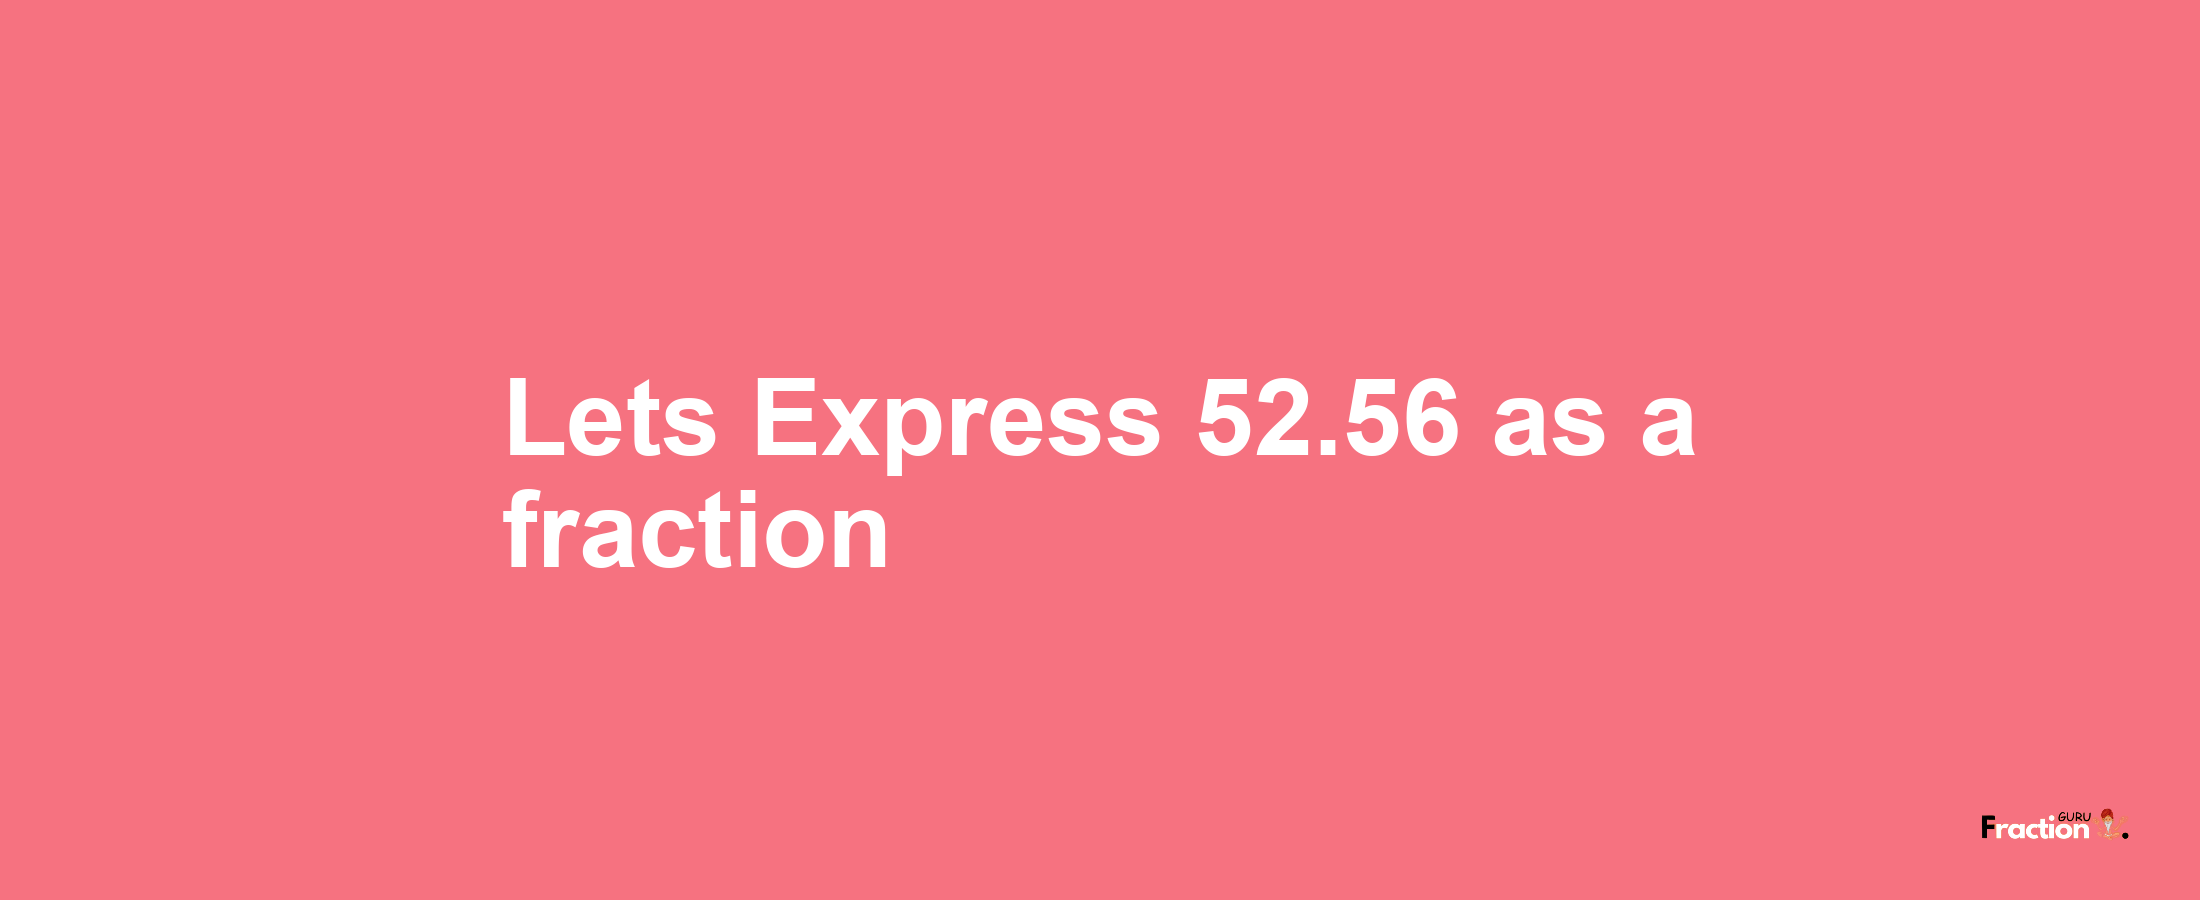 Lets Express 52.56 as afraction